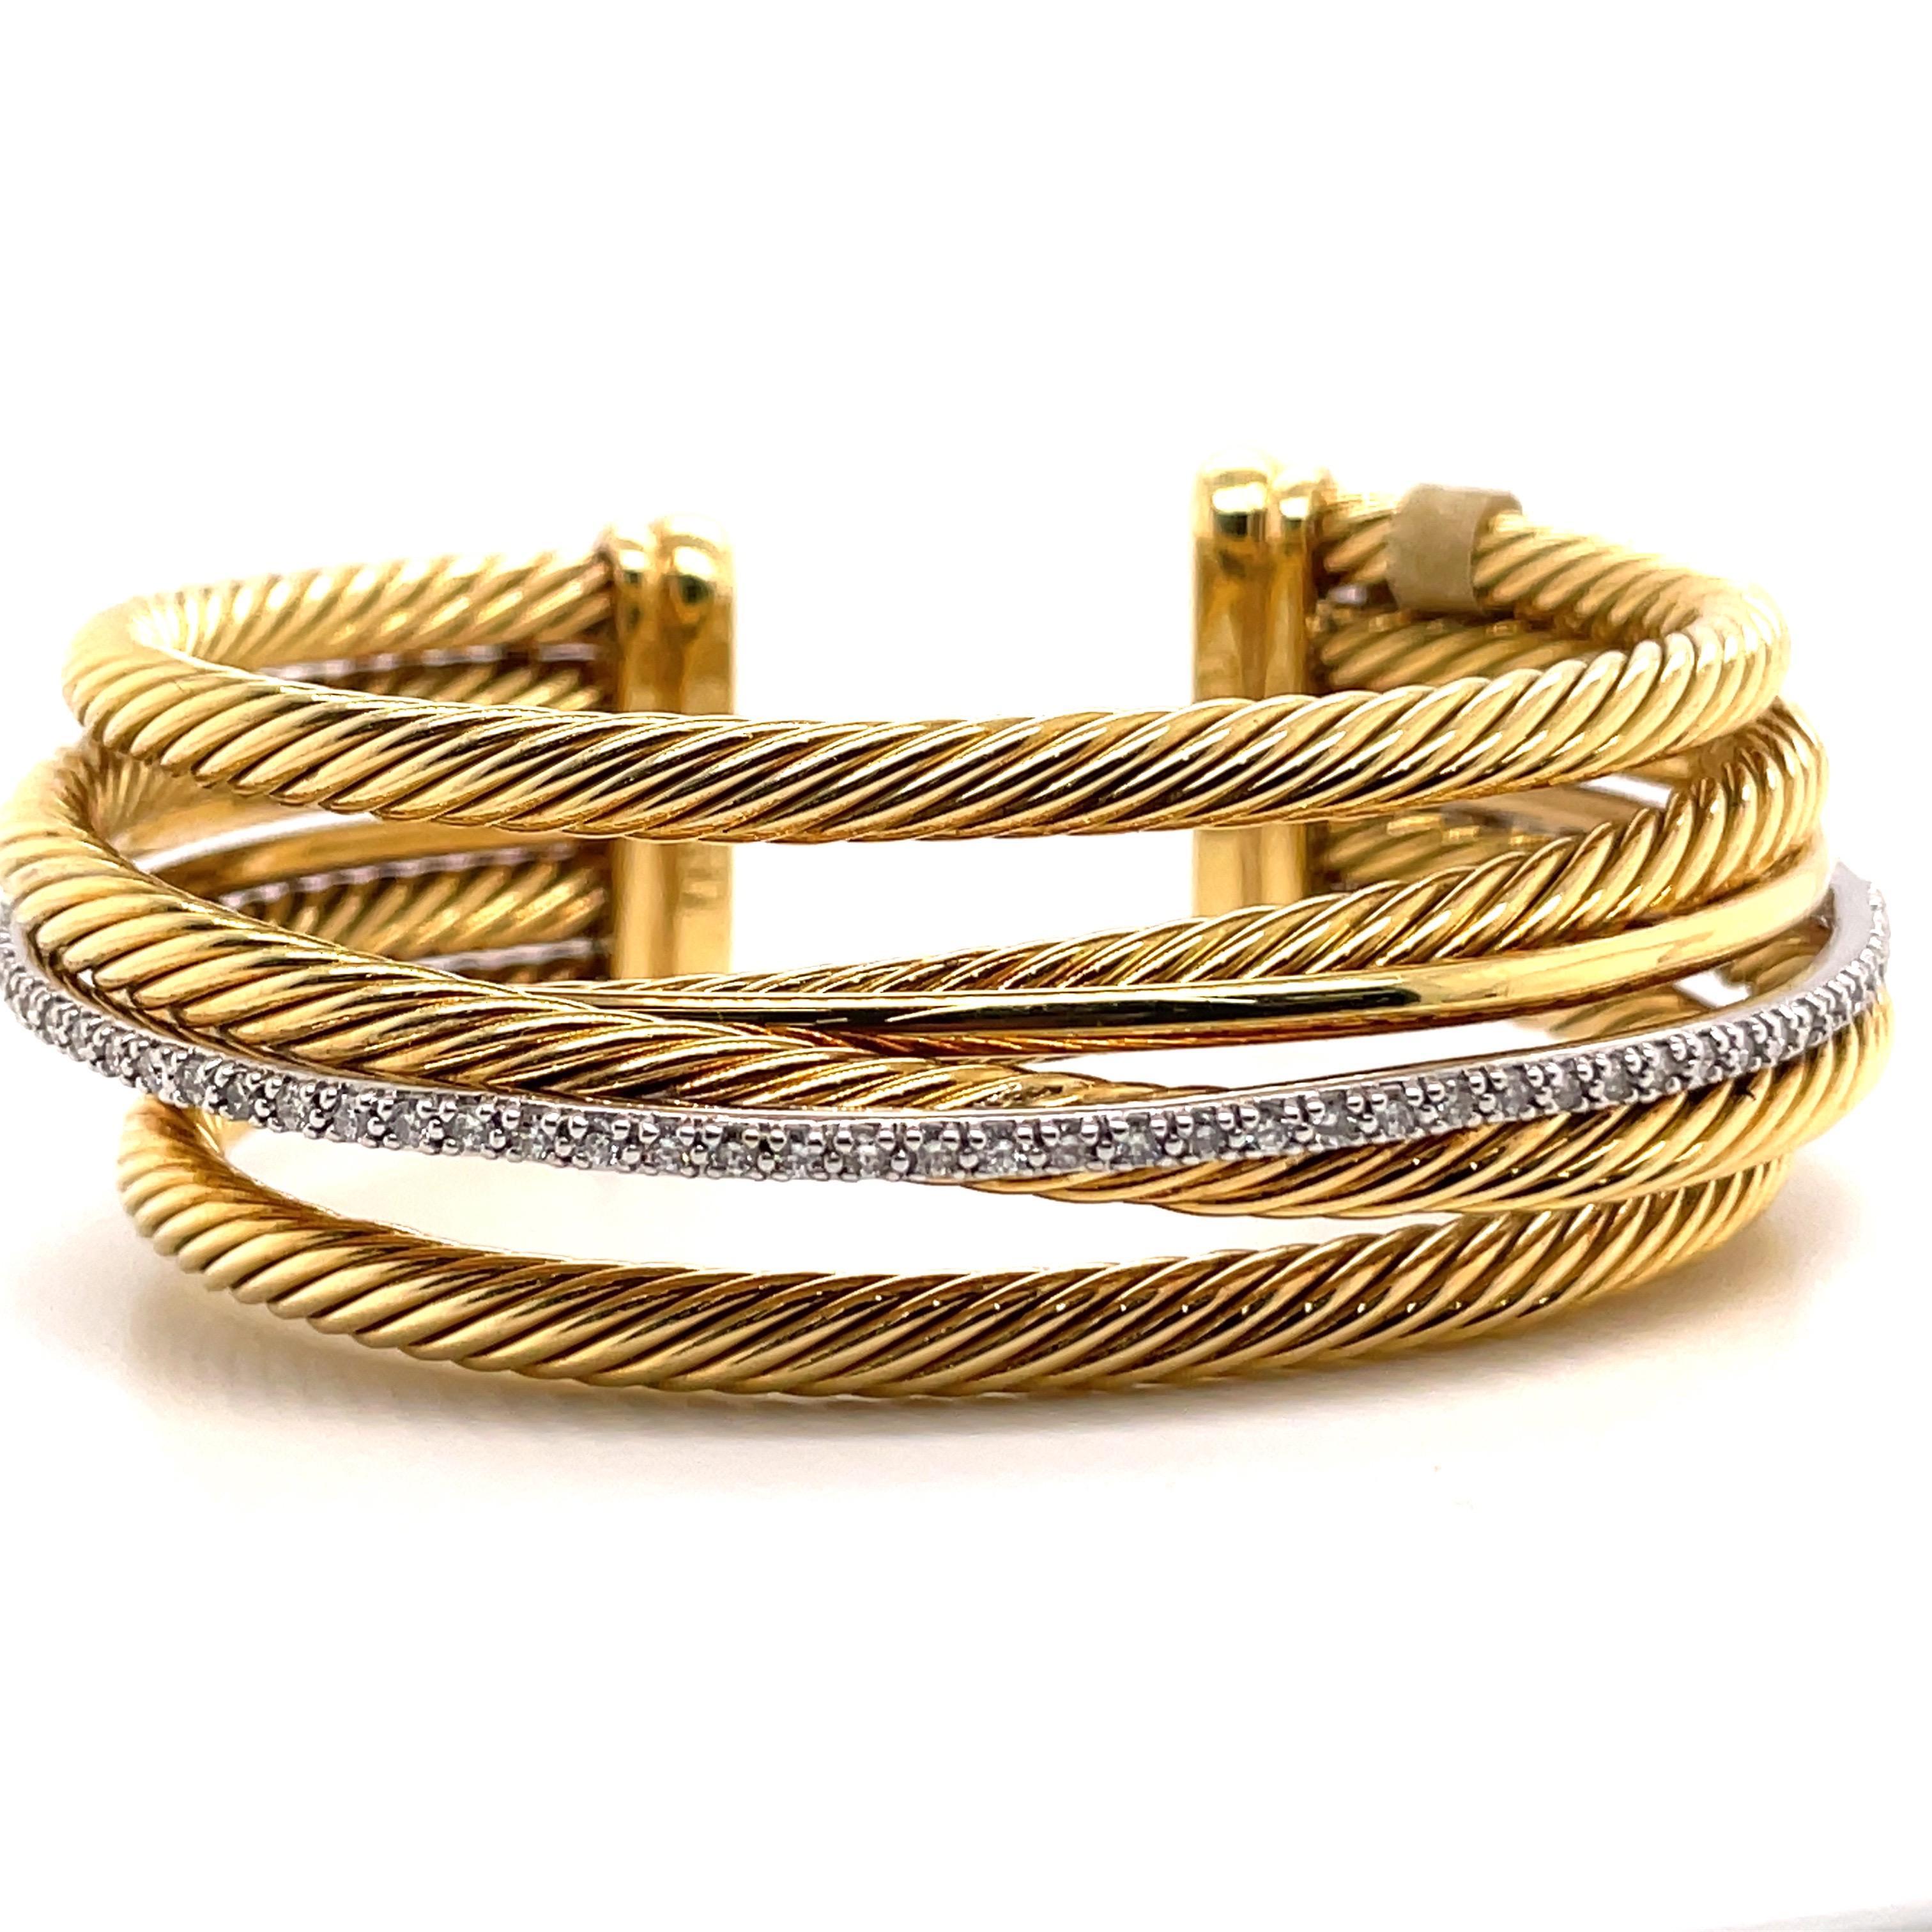 From The Crossover Collection this David Yurman bracelet 4 crossover twist cords, one polished cord and one diamond row, in 18 Karat yellow gold. 
81.7 Grams